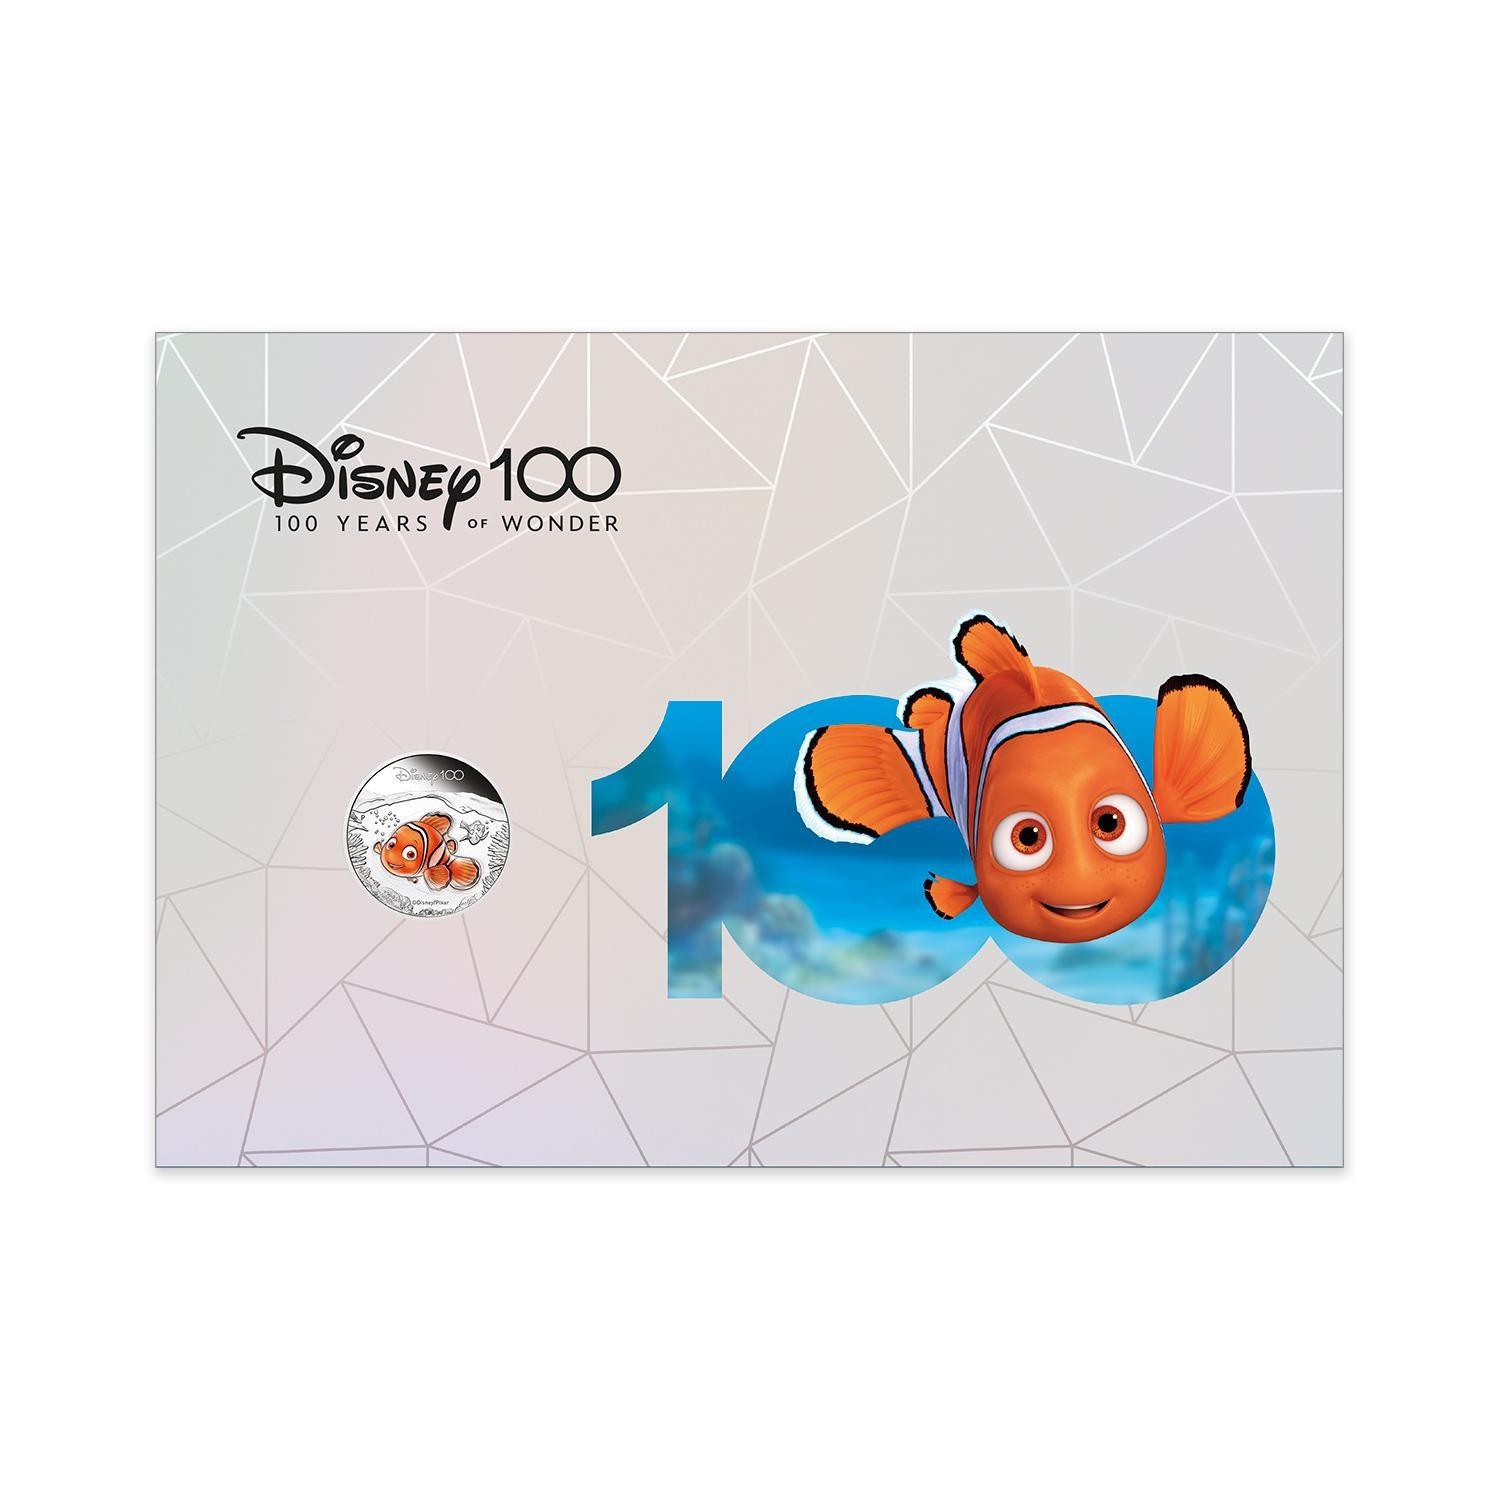 2023 Impressions - Disney 100 Years - Nemo Limited Edition Silver Proof Coin and Prestige Postal Numismatic Cover - Loose Change Coins